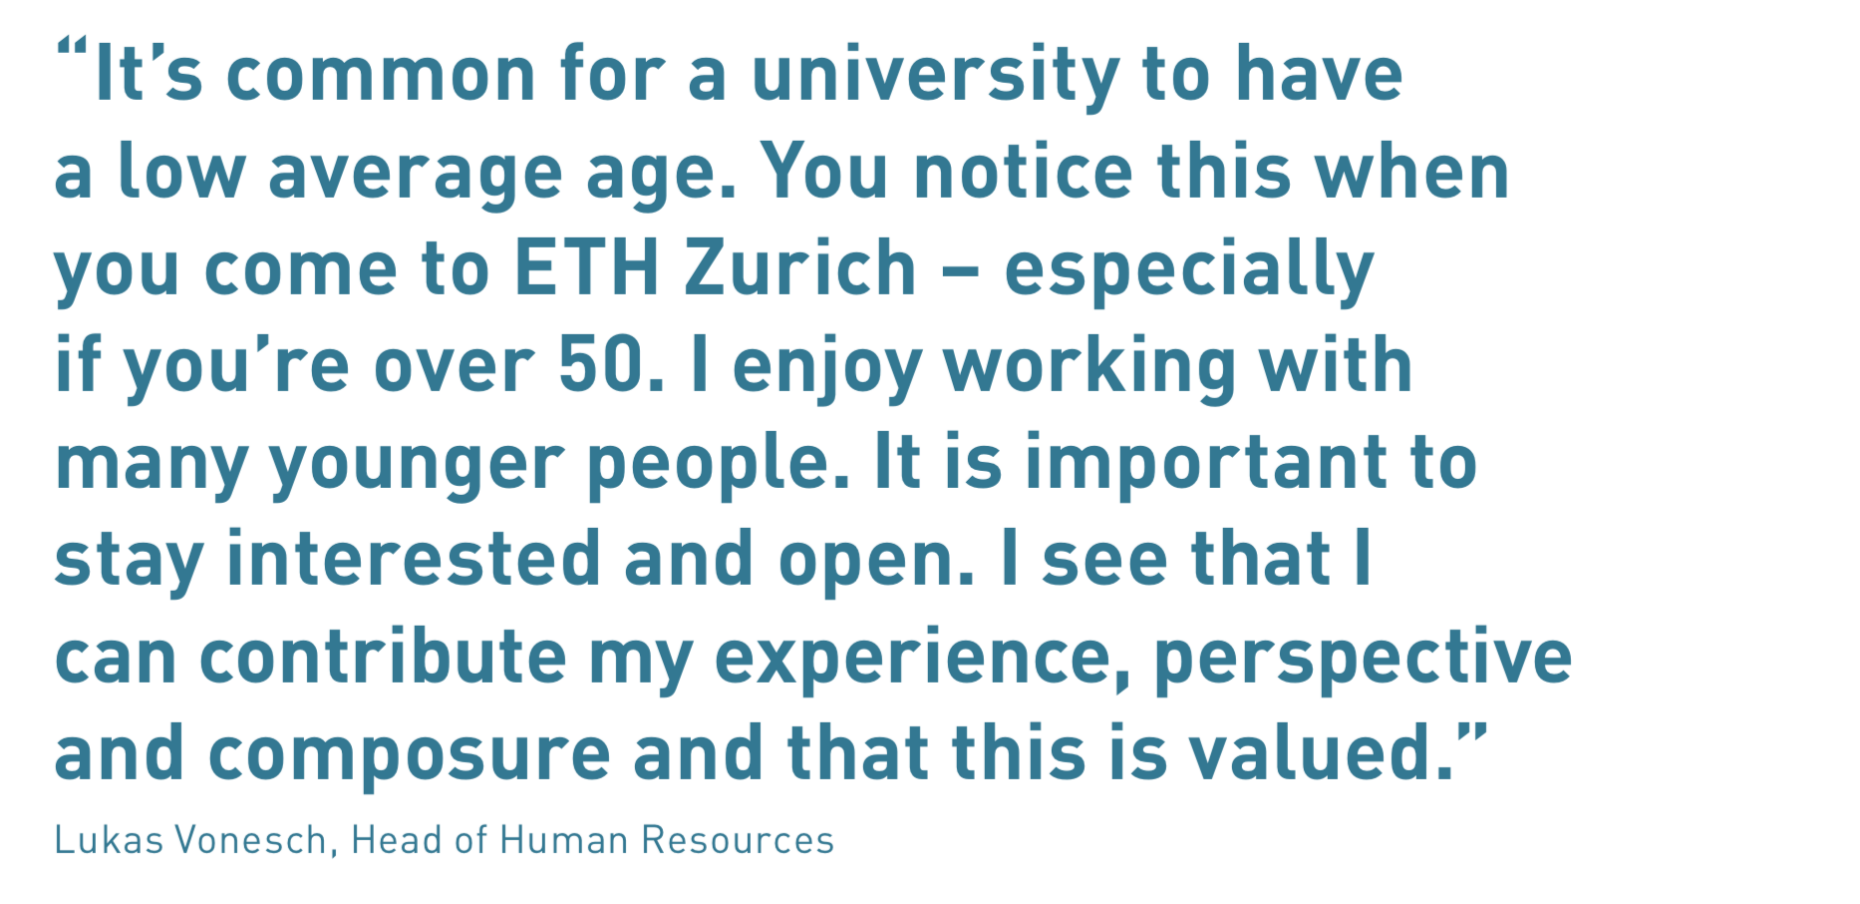 “It’s common for a university to have a low average age. You notice this when  you come to ETH Zurich – especially if you’re over 50. I enjoy working with  many younger people. It is important to stay interested and open. I see that I  can contribute my experience, perspective and composure and that this is valued.”